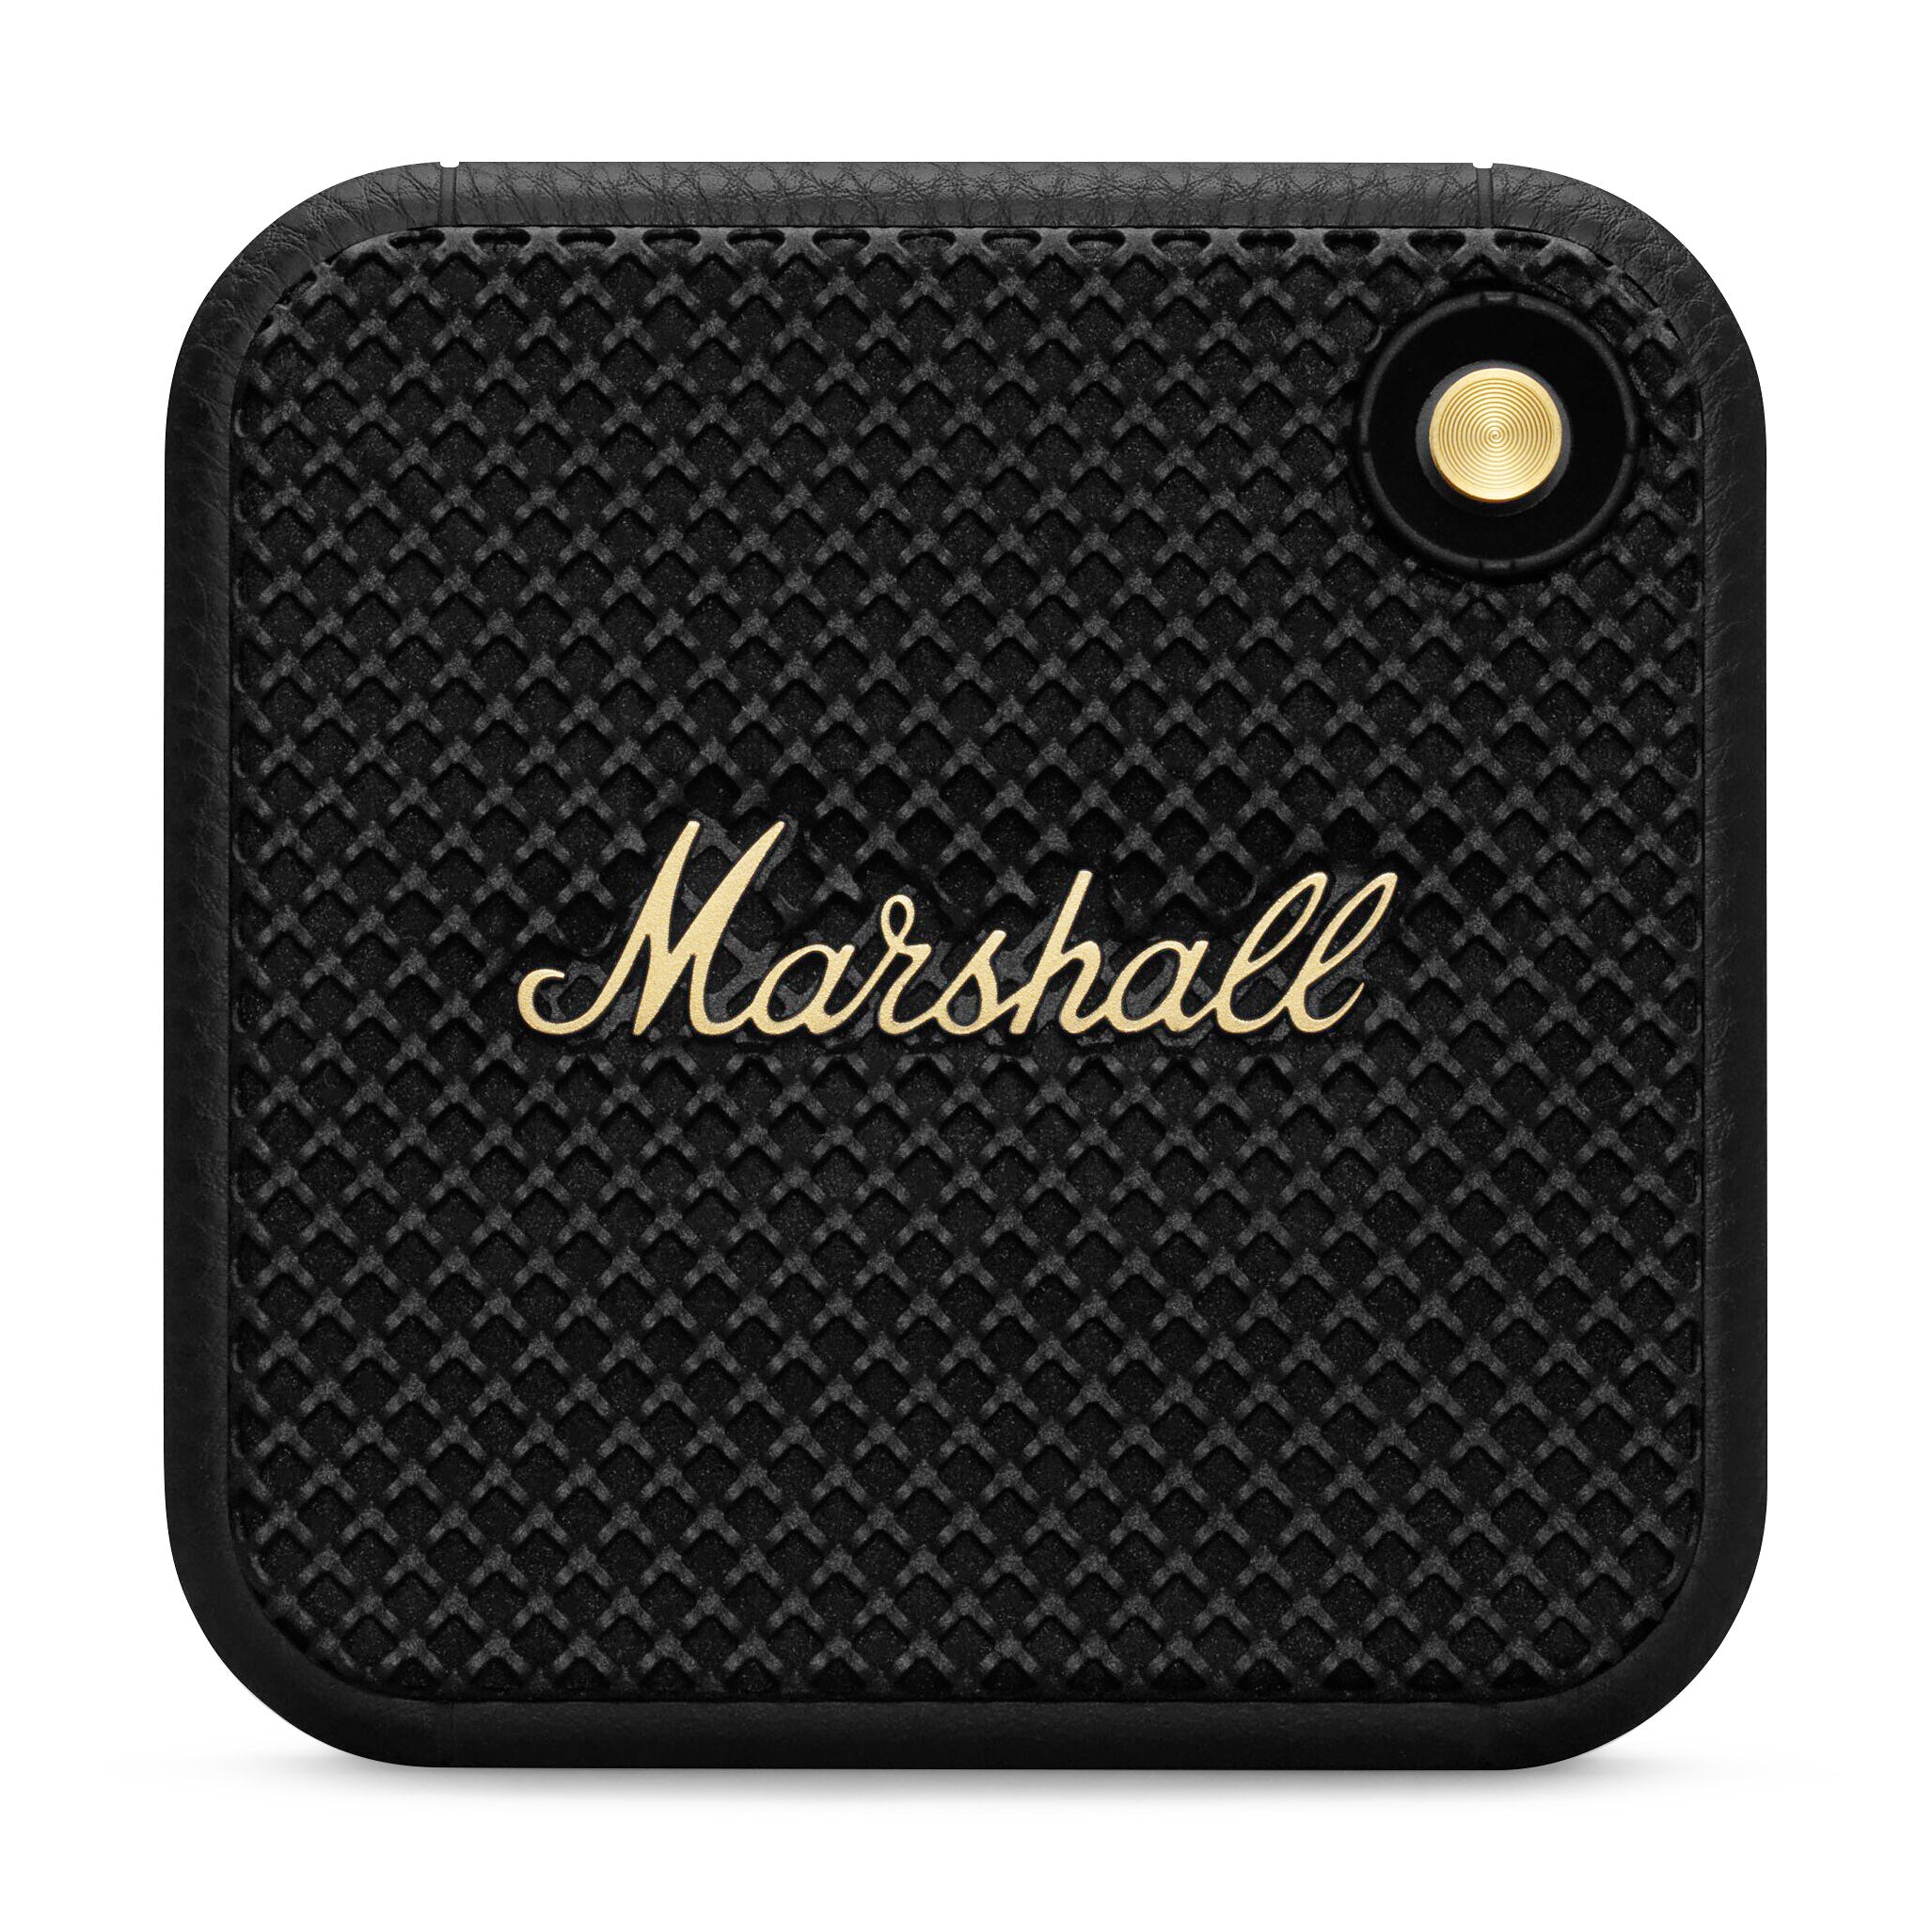 Contemporary design and sound: Marshall's Acton II Bluetooth speaker at low  of $248.50